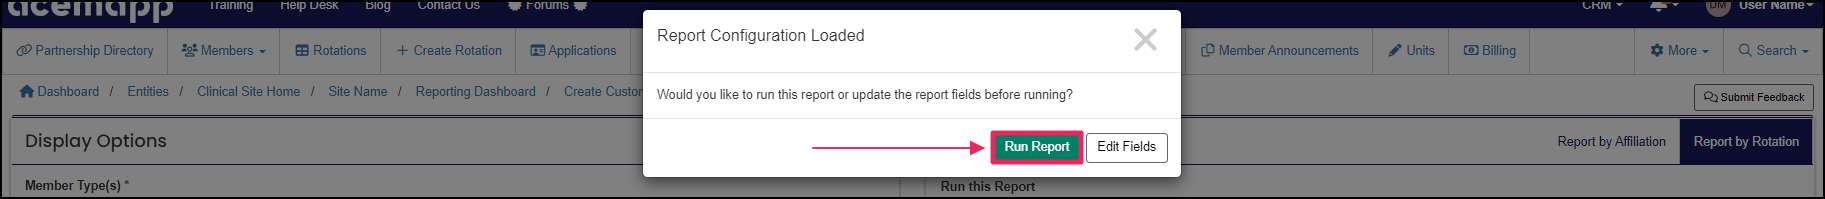 Image shows run saved report pop-up and button